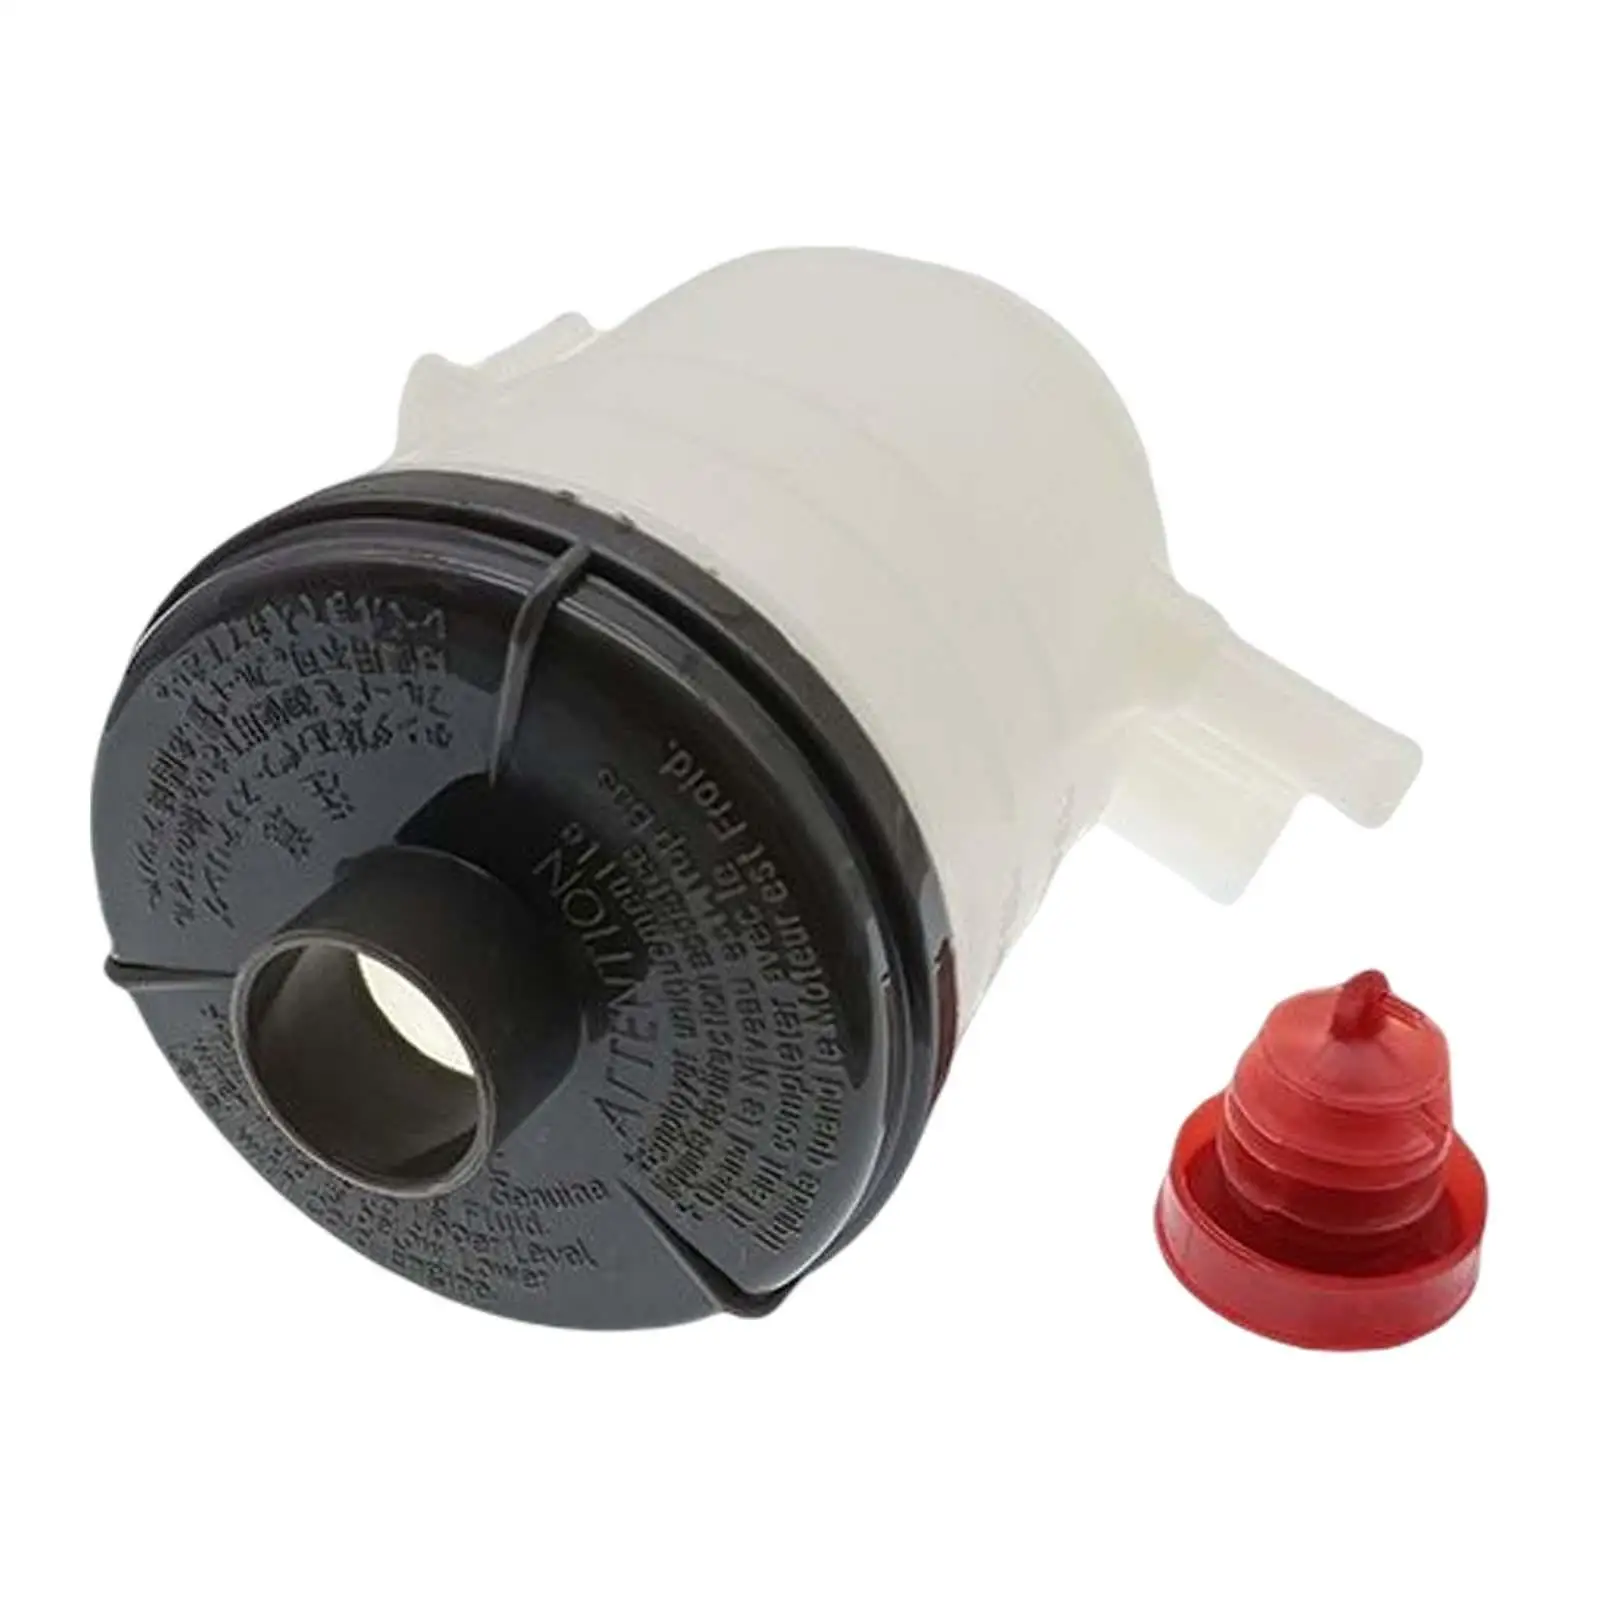 Booster Pump Oil Cup Replaces Portable Durable for Honda Accord 98-02